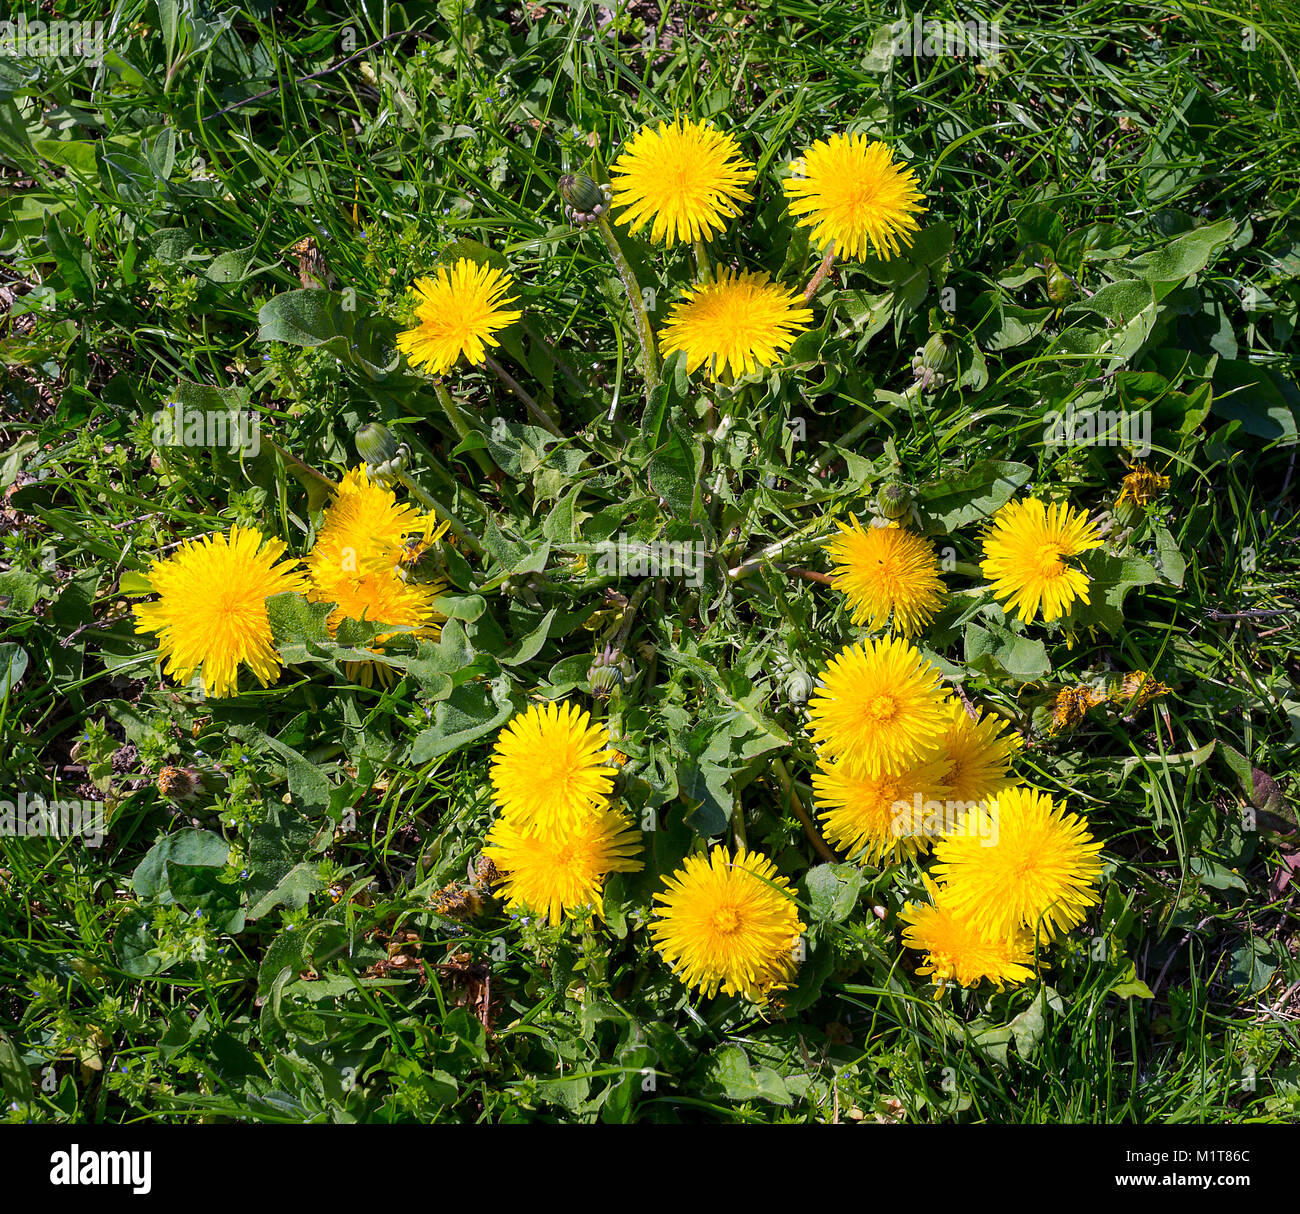 Early spring flowers yellow dandelions on green grass. Taraxacum officinale Stock Photo